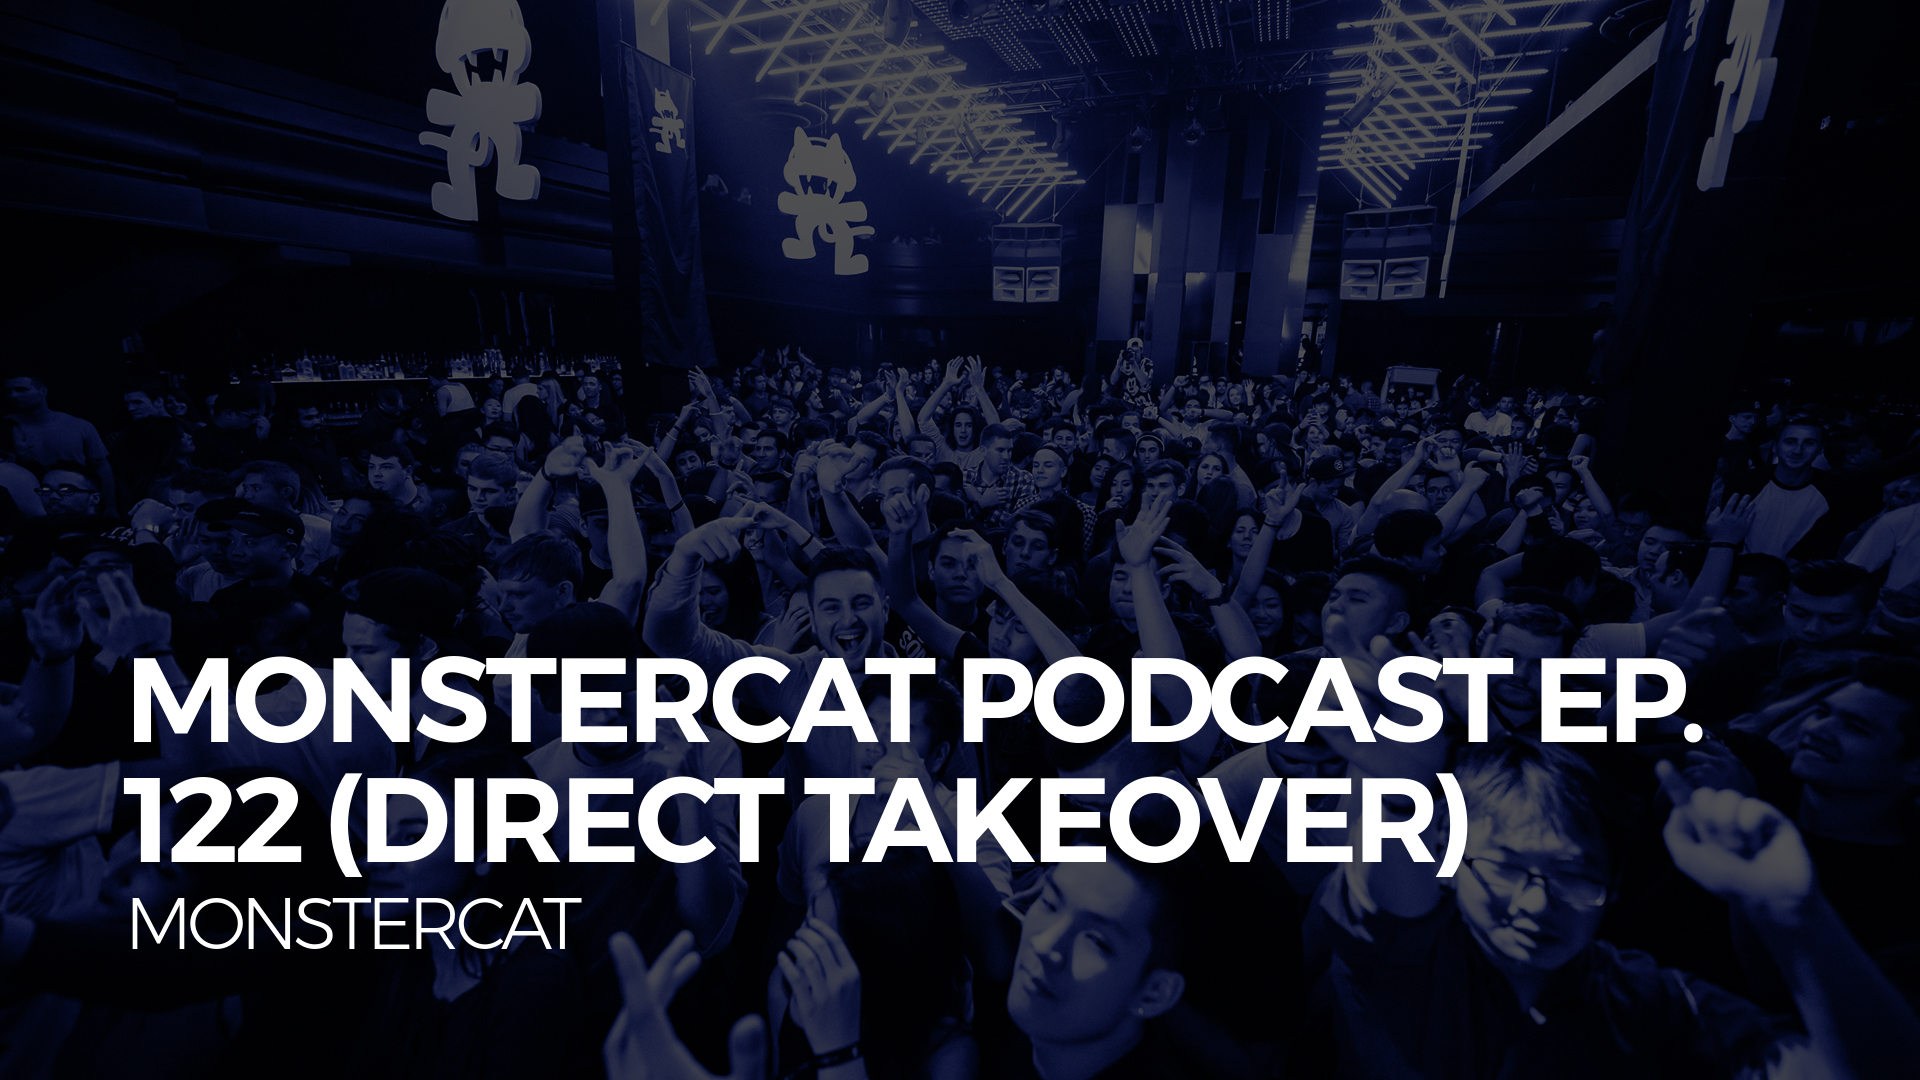 Monstercat Podcast Ep. 122 (Direct Takeover)